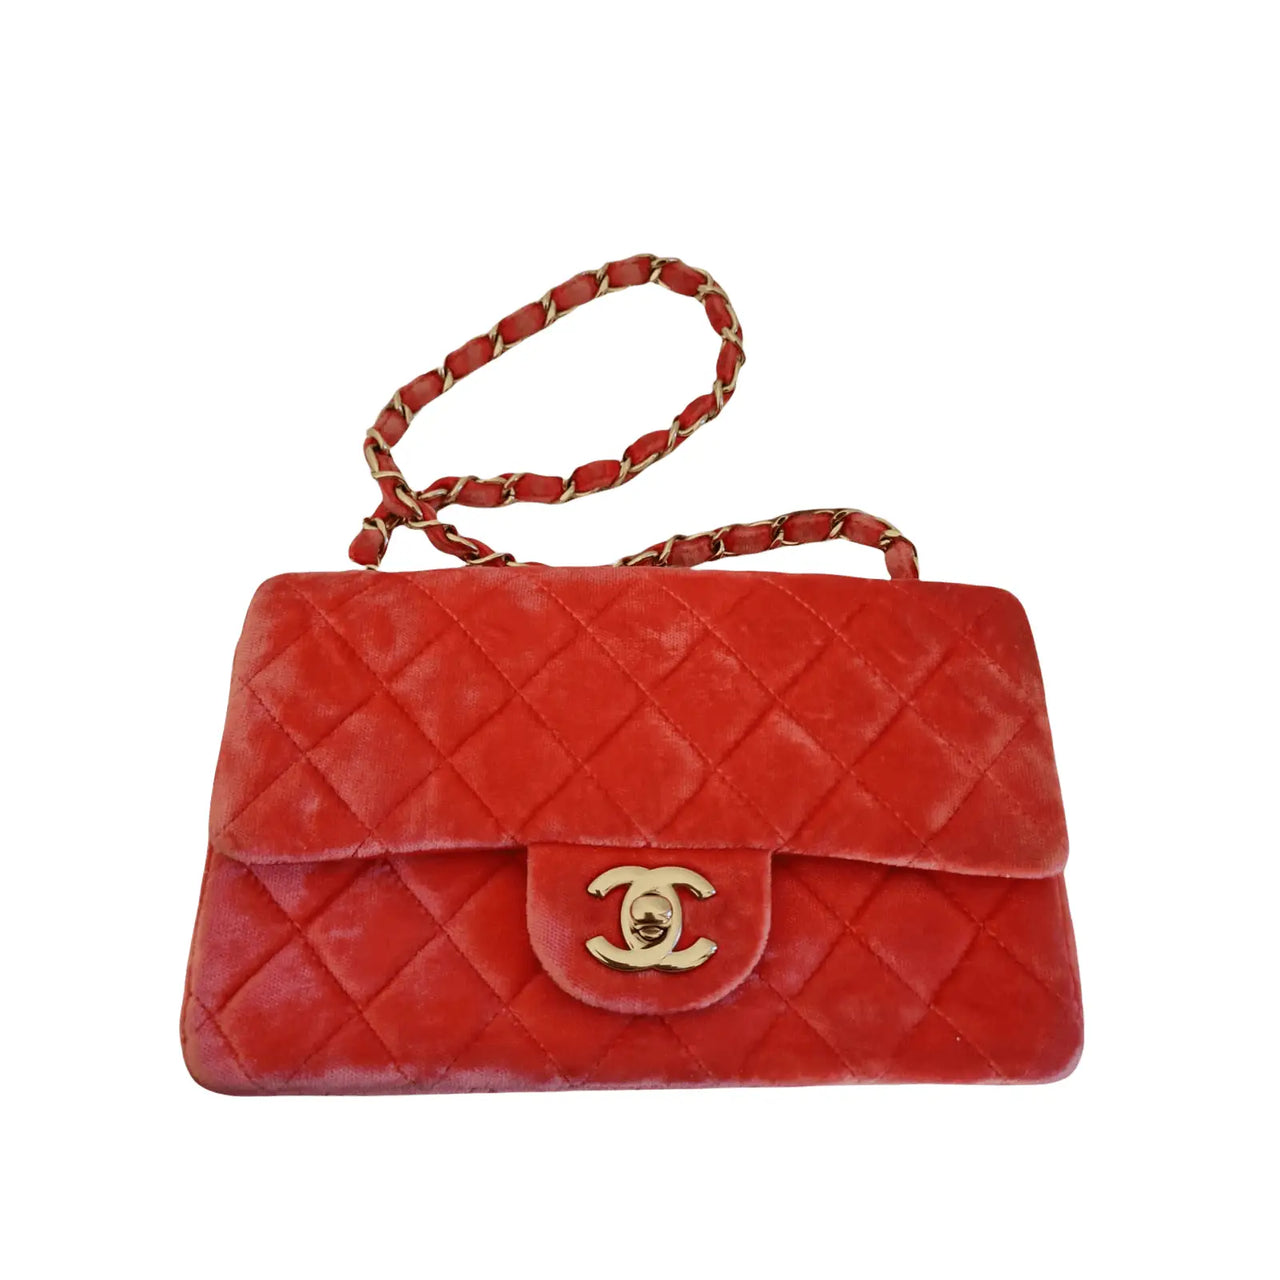 Sac Chanel Timeless  SecondeMainDeLuxe